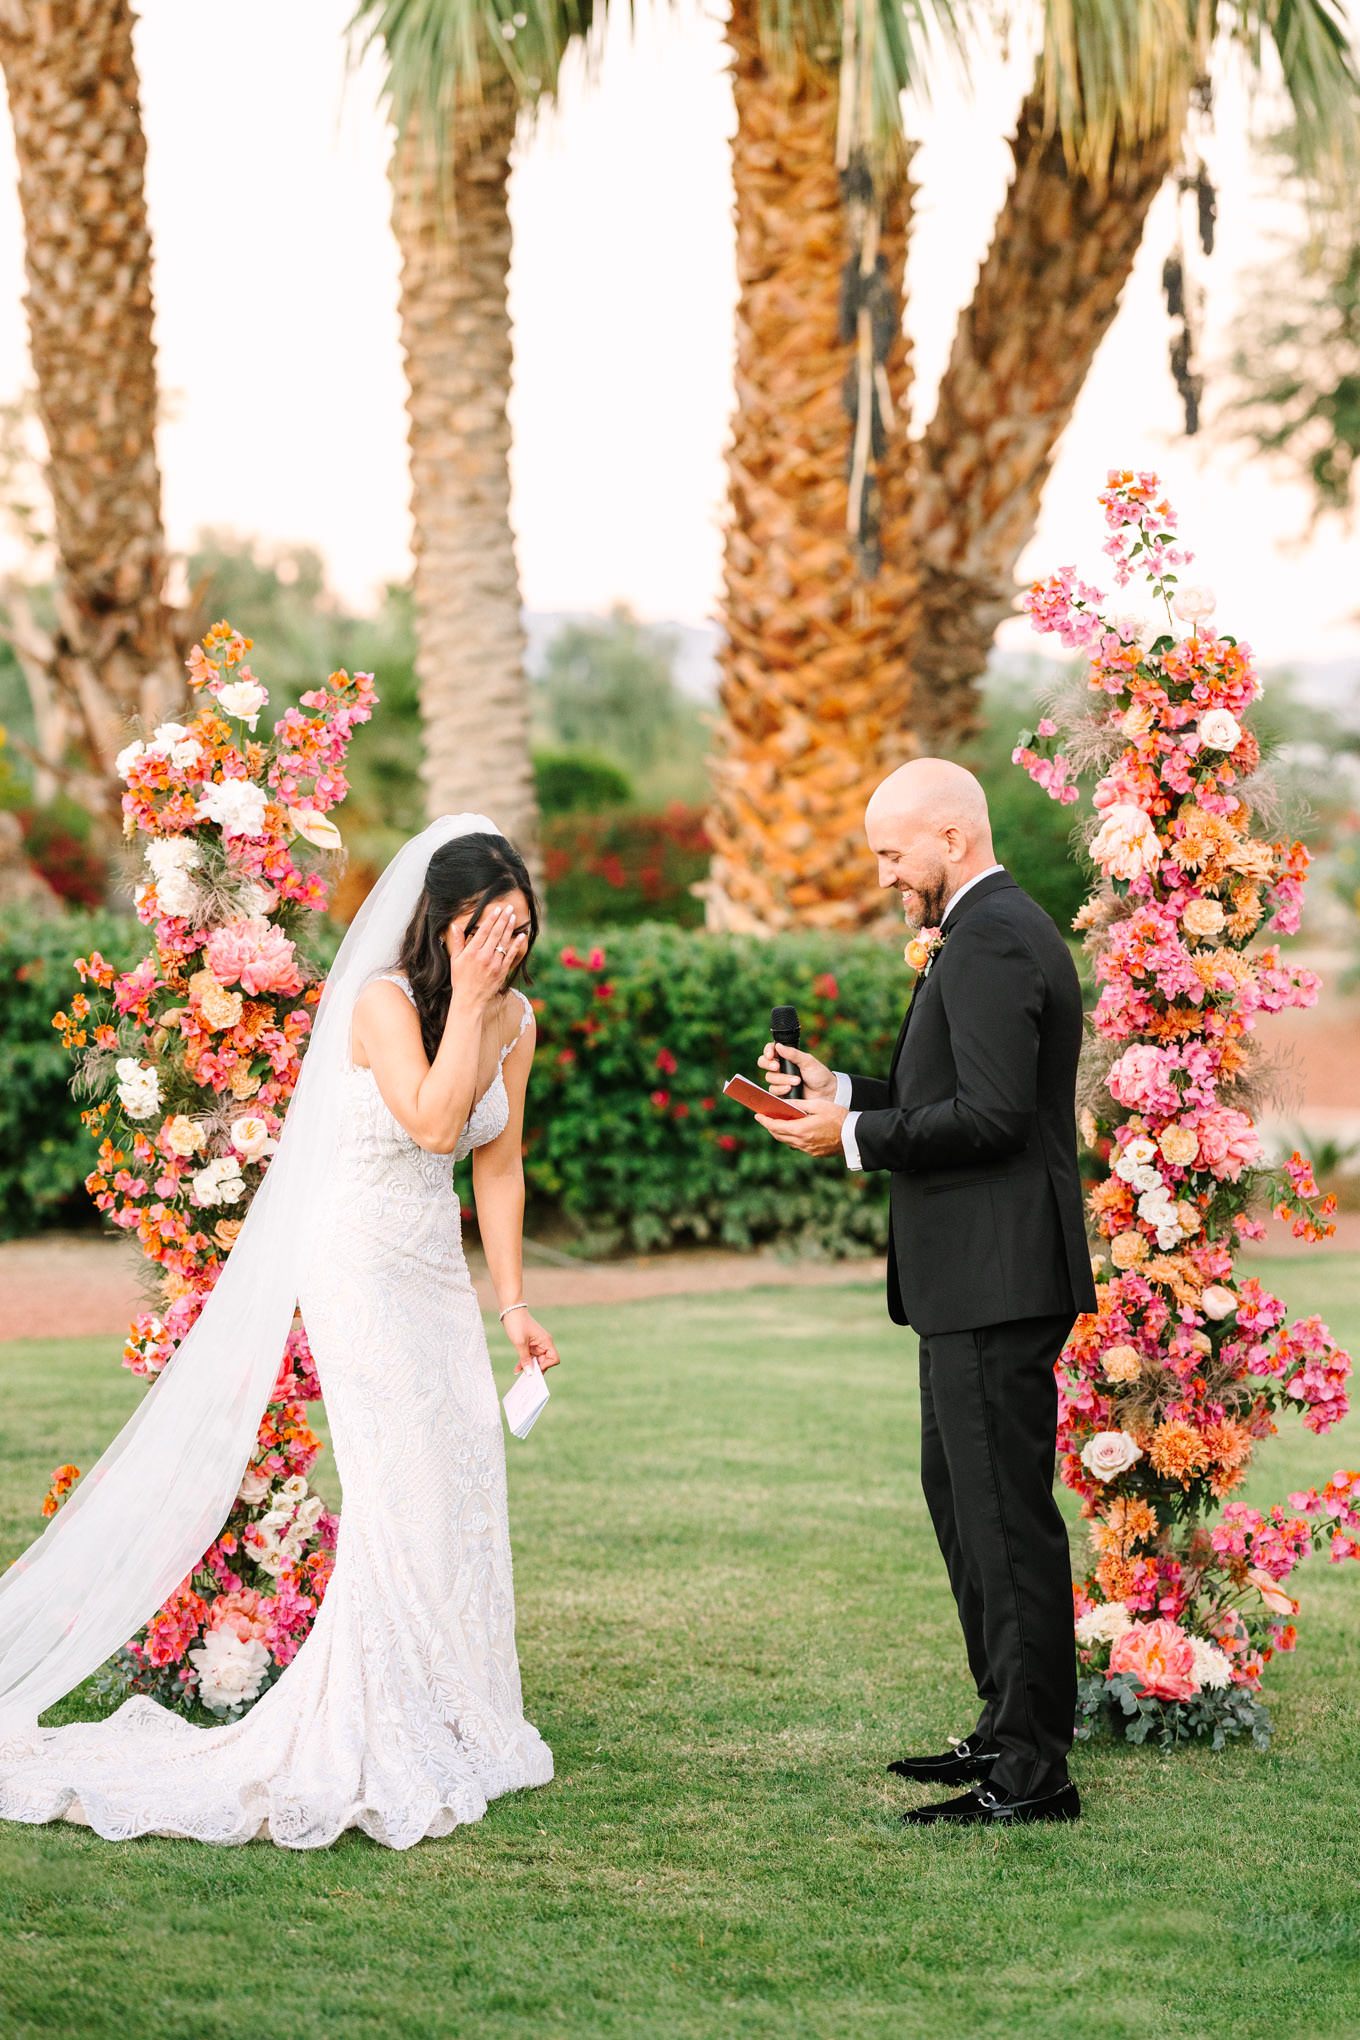 Groom saying vows | Pink Bougainvillea Estate wedding | Colorful LA wedding photography | #bougainvilleaestate #palmspringswedding #palmspringsweddingvenue #palmspringsphotographer Source: Mary Costa Photography | Los Angeles